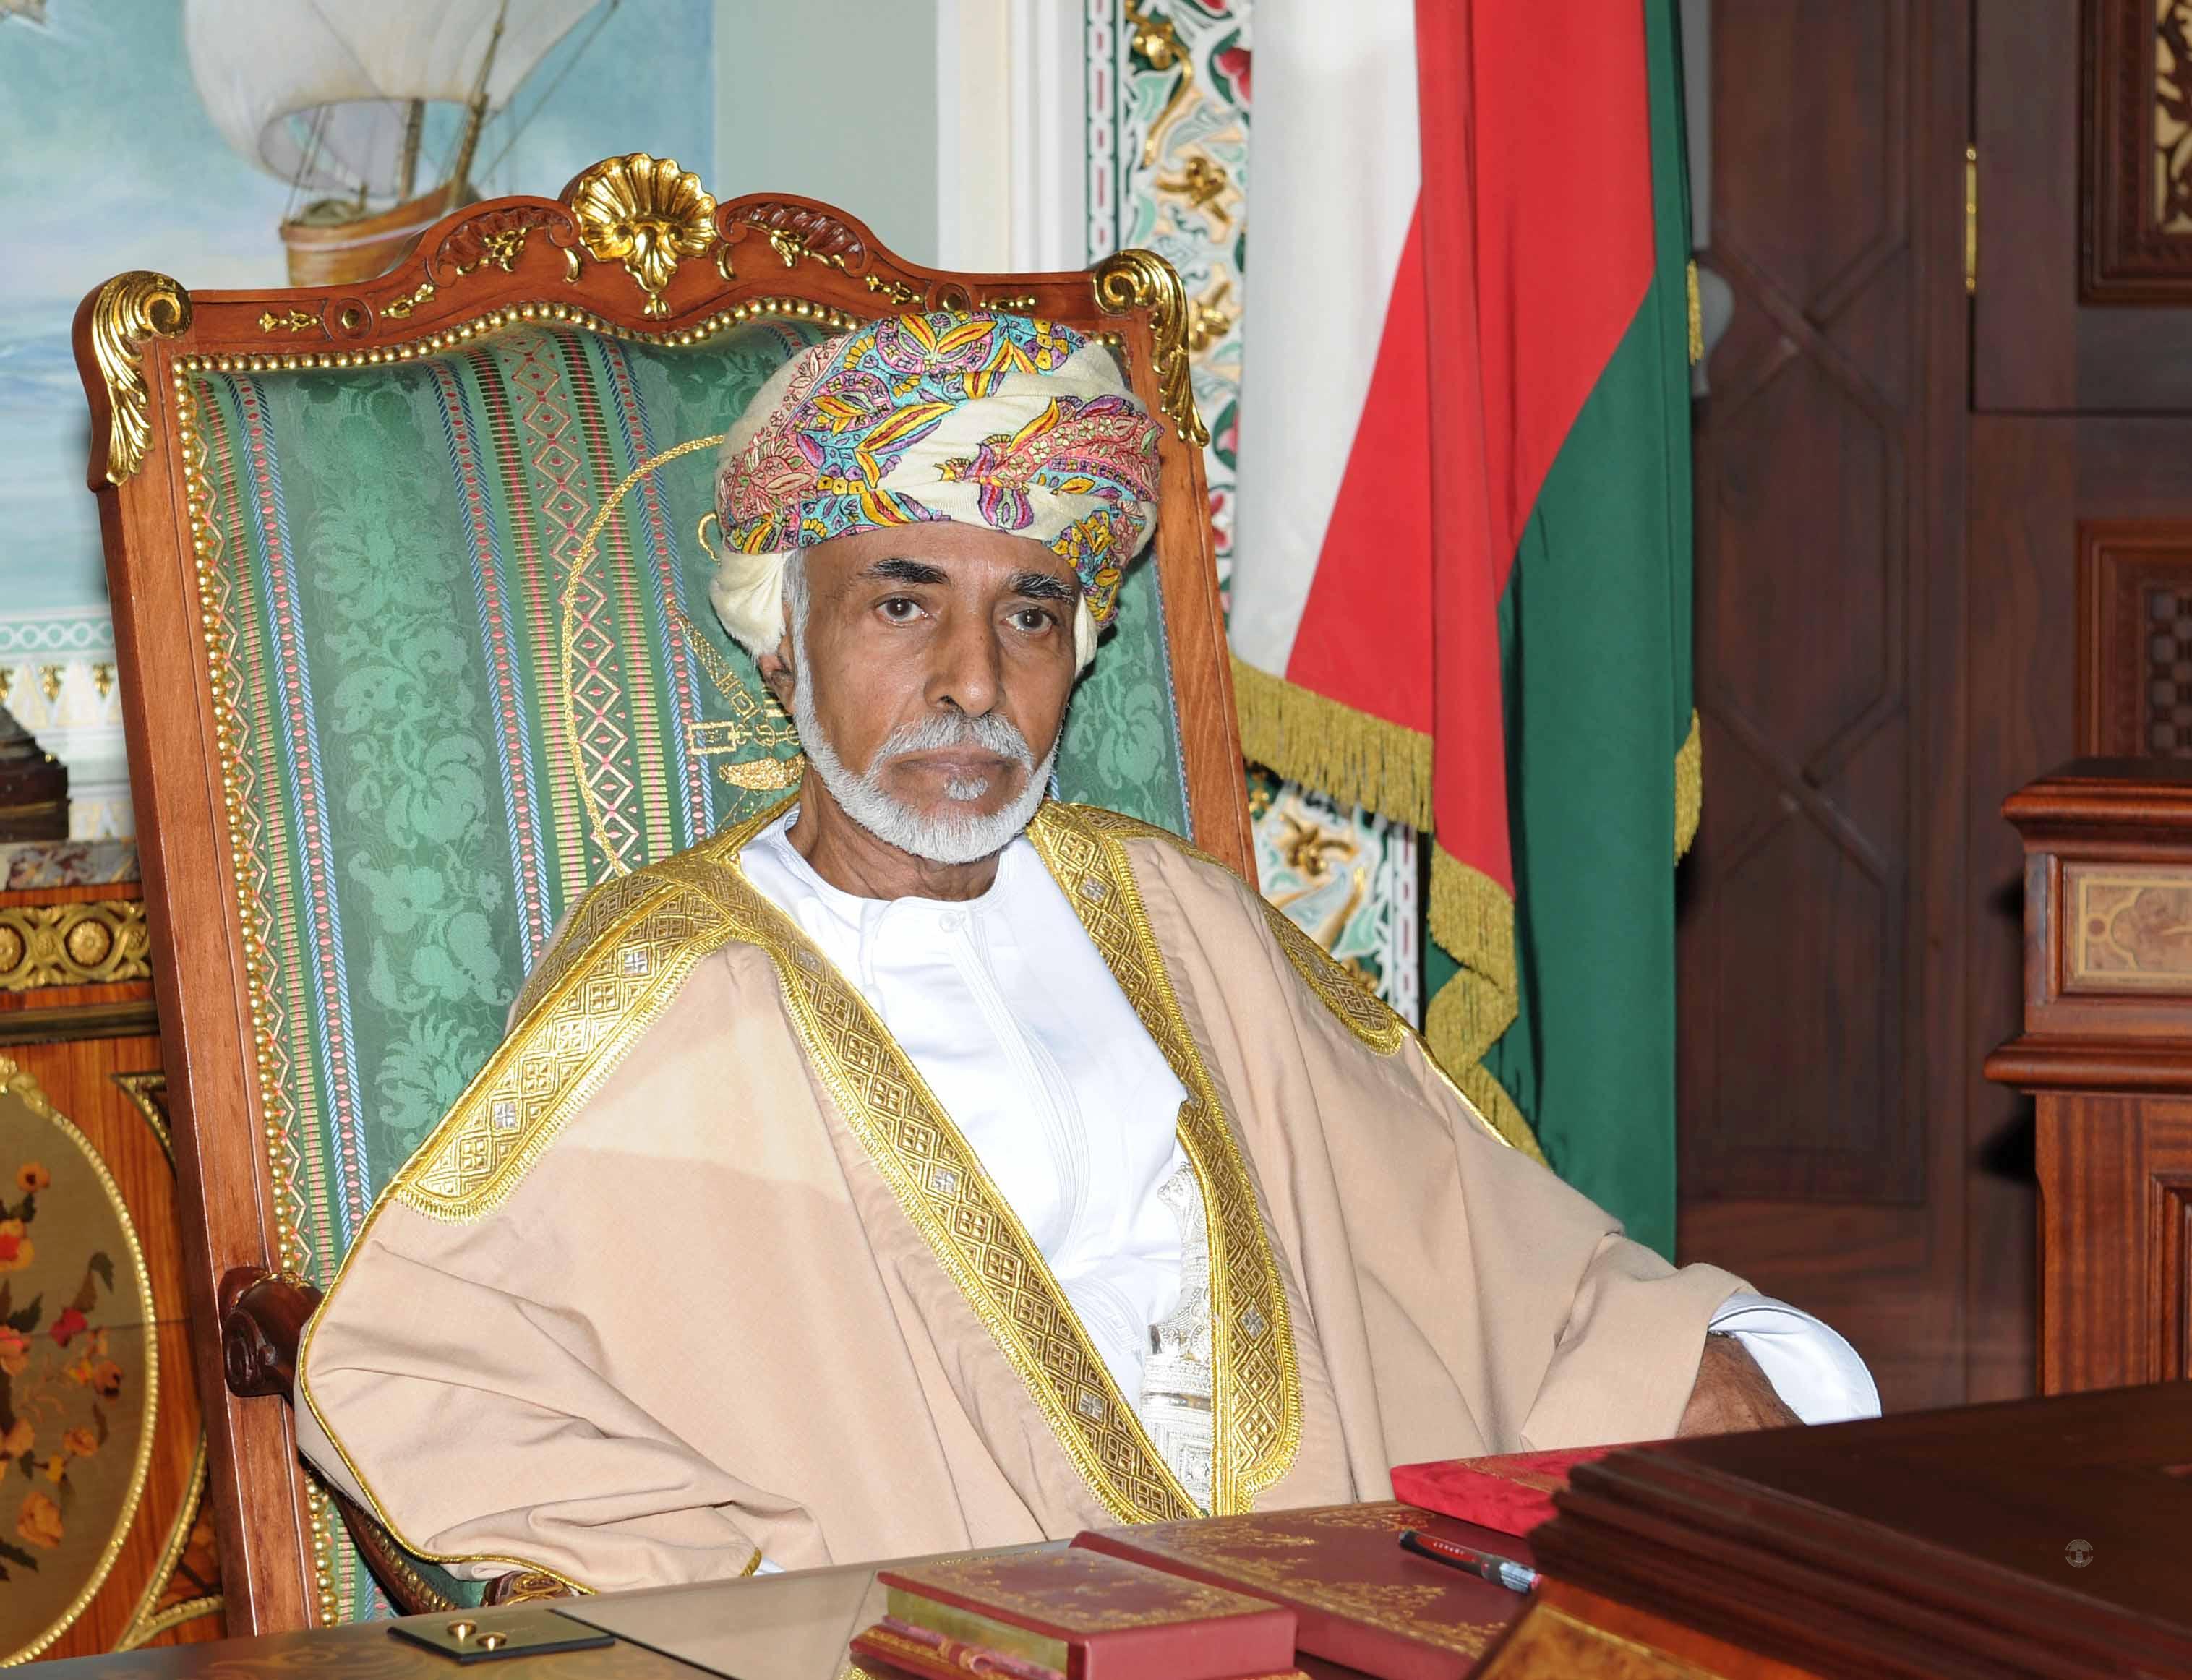 His Majesty Sultan Qaboos sends greetings to Denmark